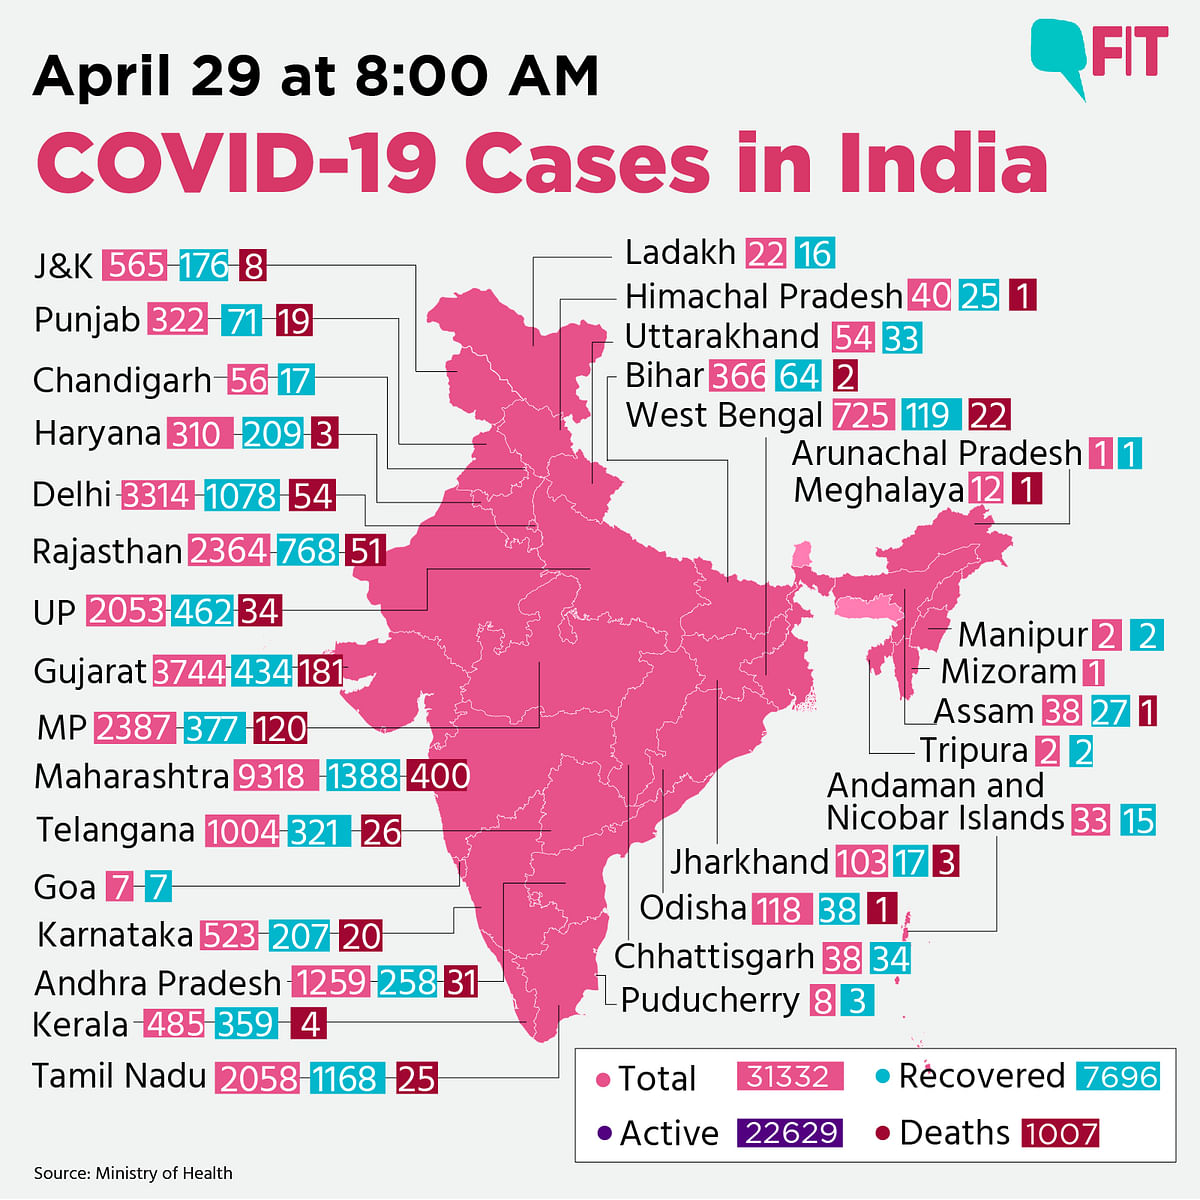 COVID-19 India Updates: Death toll at 1,007; Cases Climb to 31,332